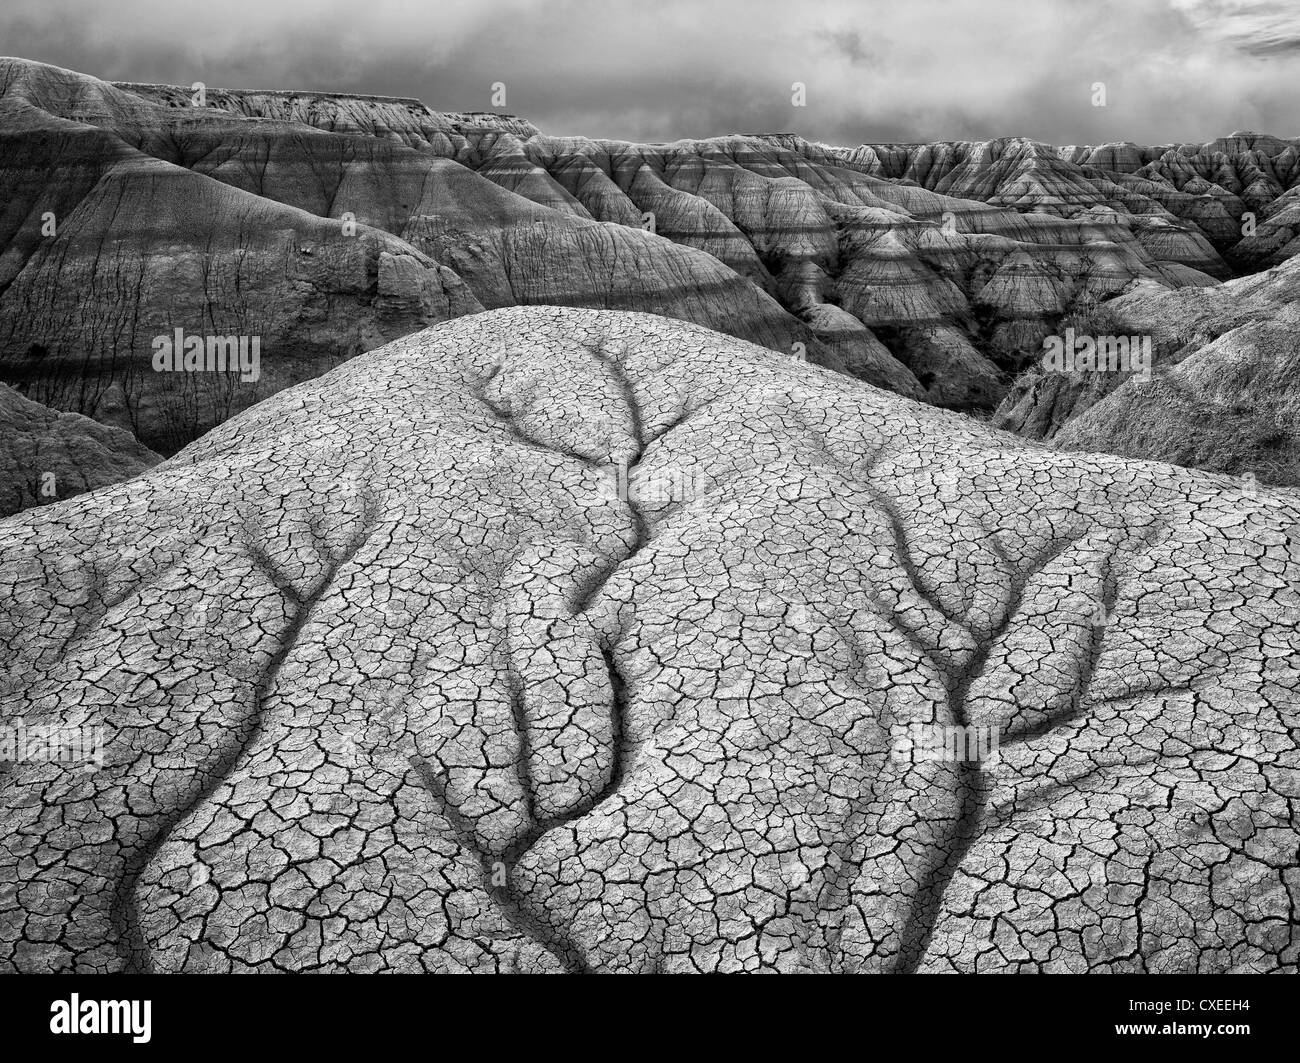 Eroded and cracked rock and mud formations. Badlands National Park. South Dakota formations. Stock Photo